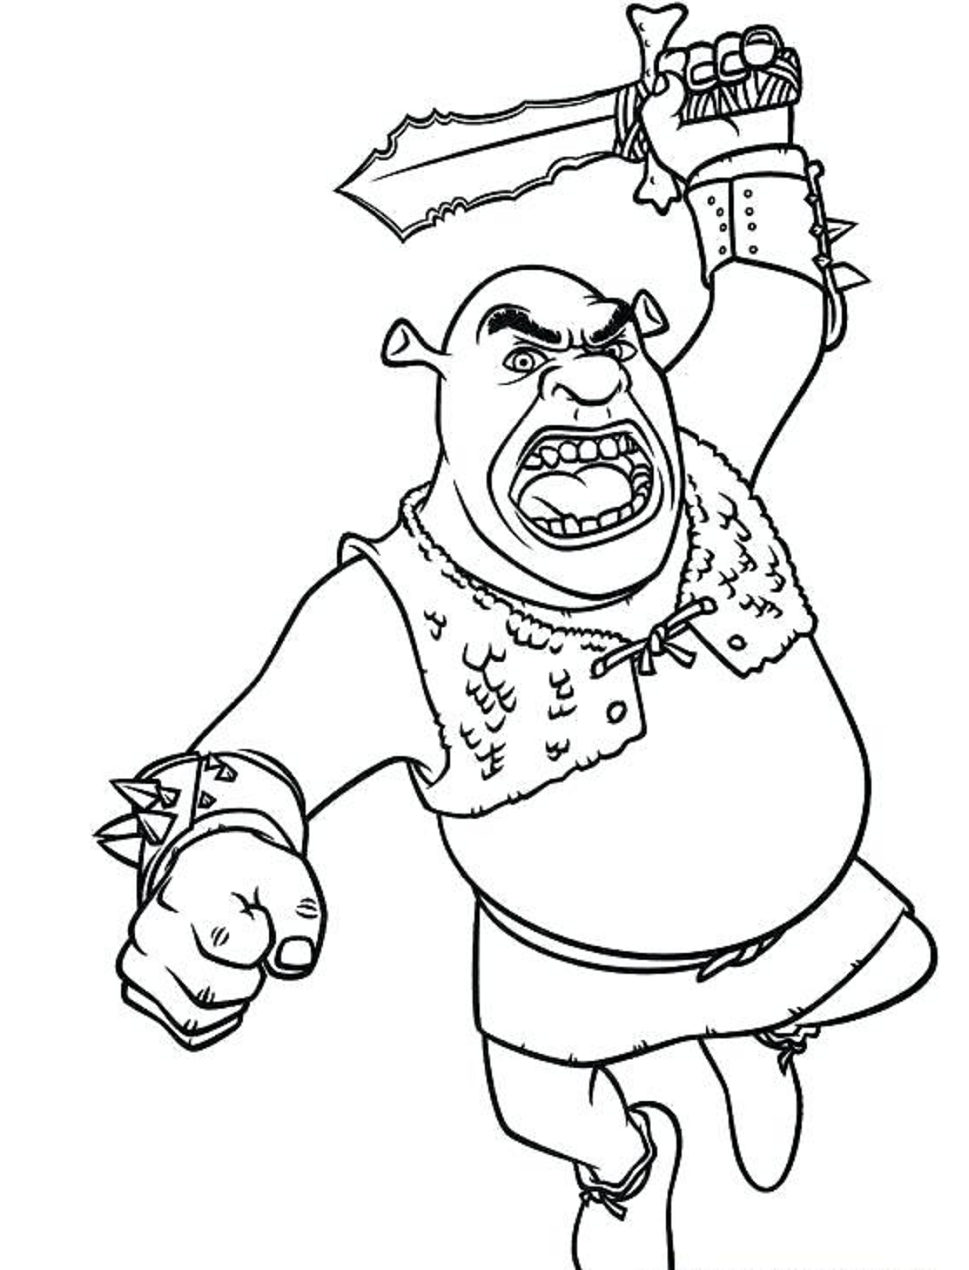 The Shrek Coloring Page - Free Printable Coloring Pages for Kids